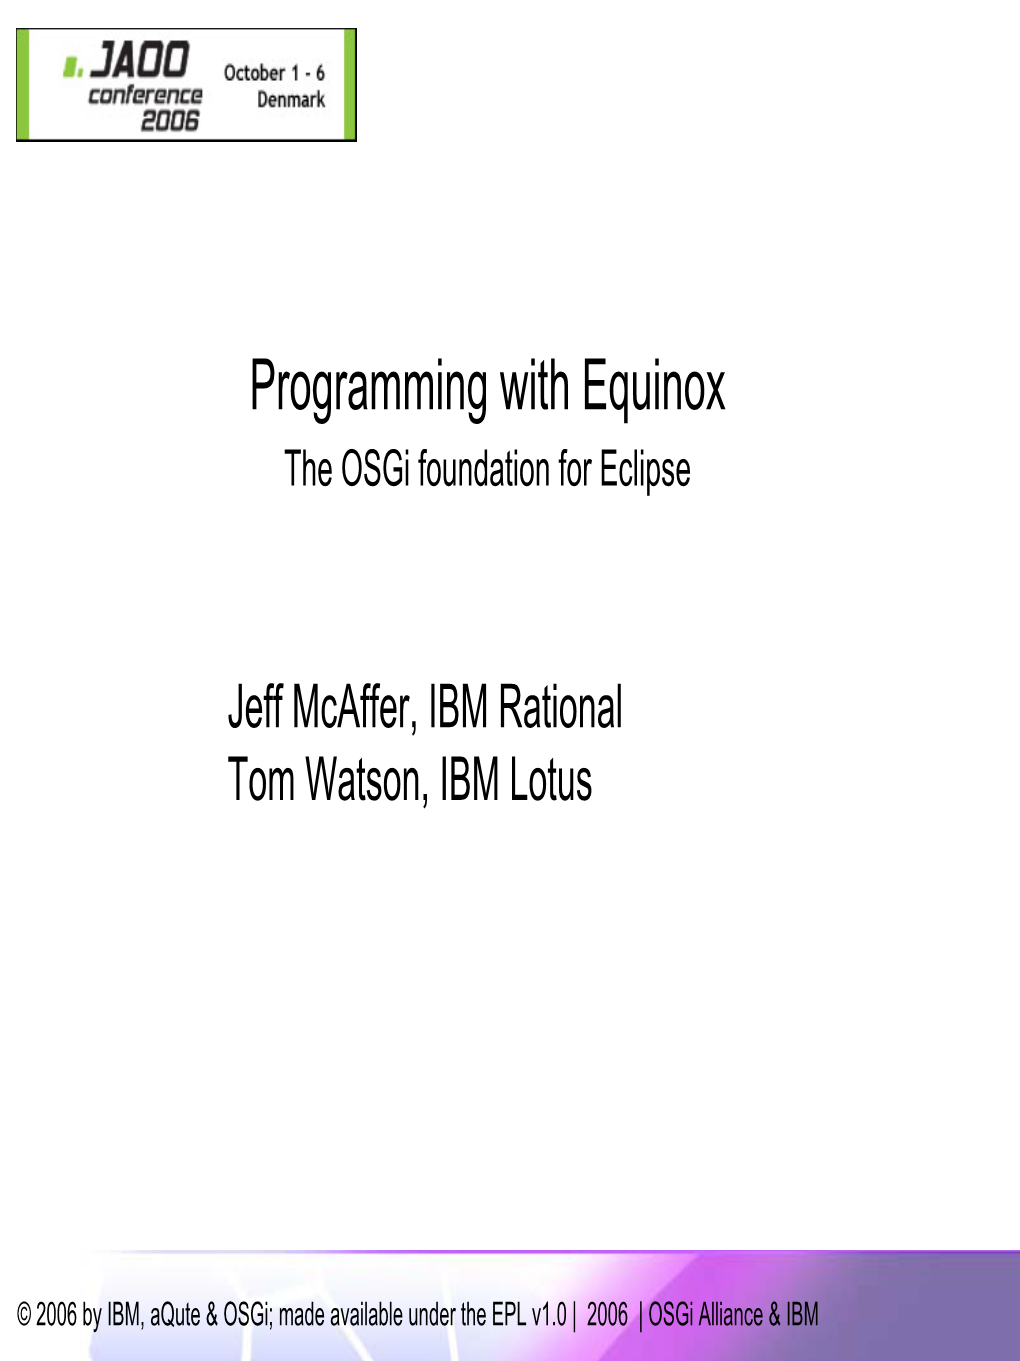 Programming with Equinox the Osgi Foundation for Eclipse